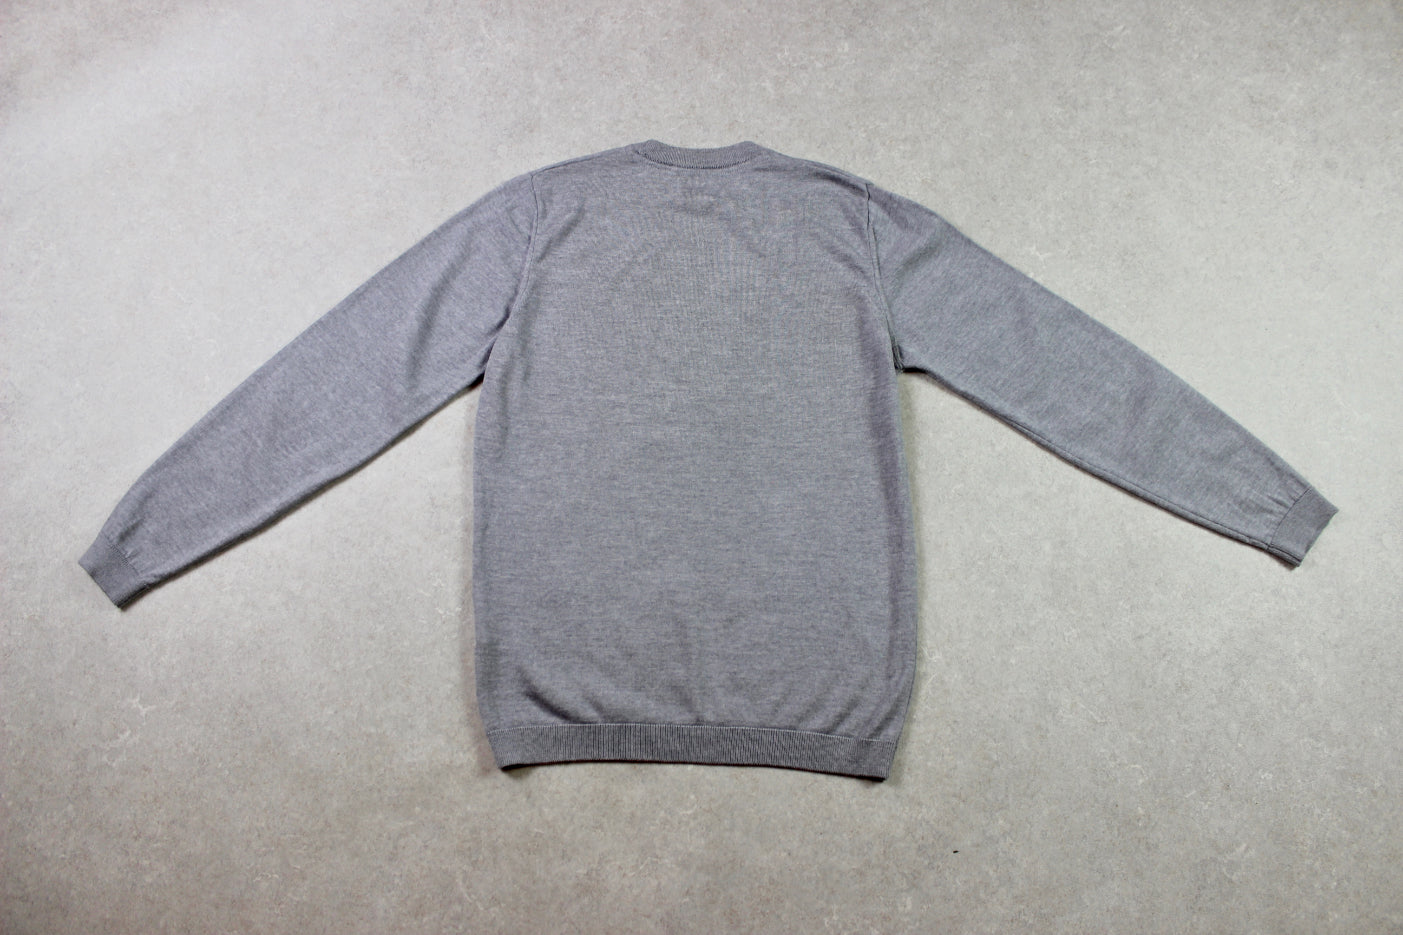 Norse Projects - Sigfred Merino Wool Jumper - Grey - Large